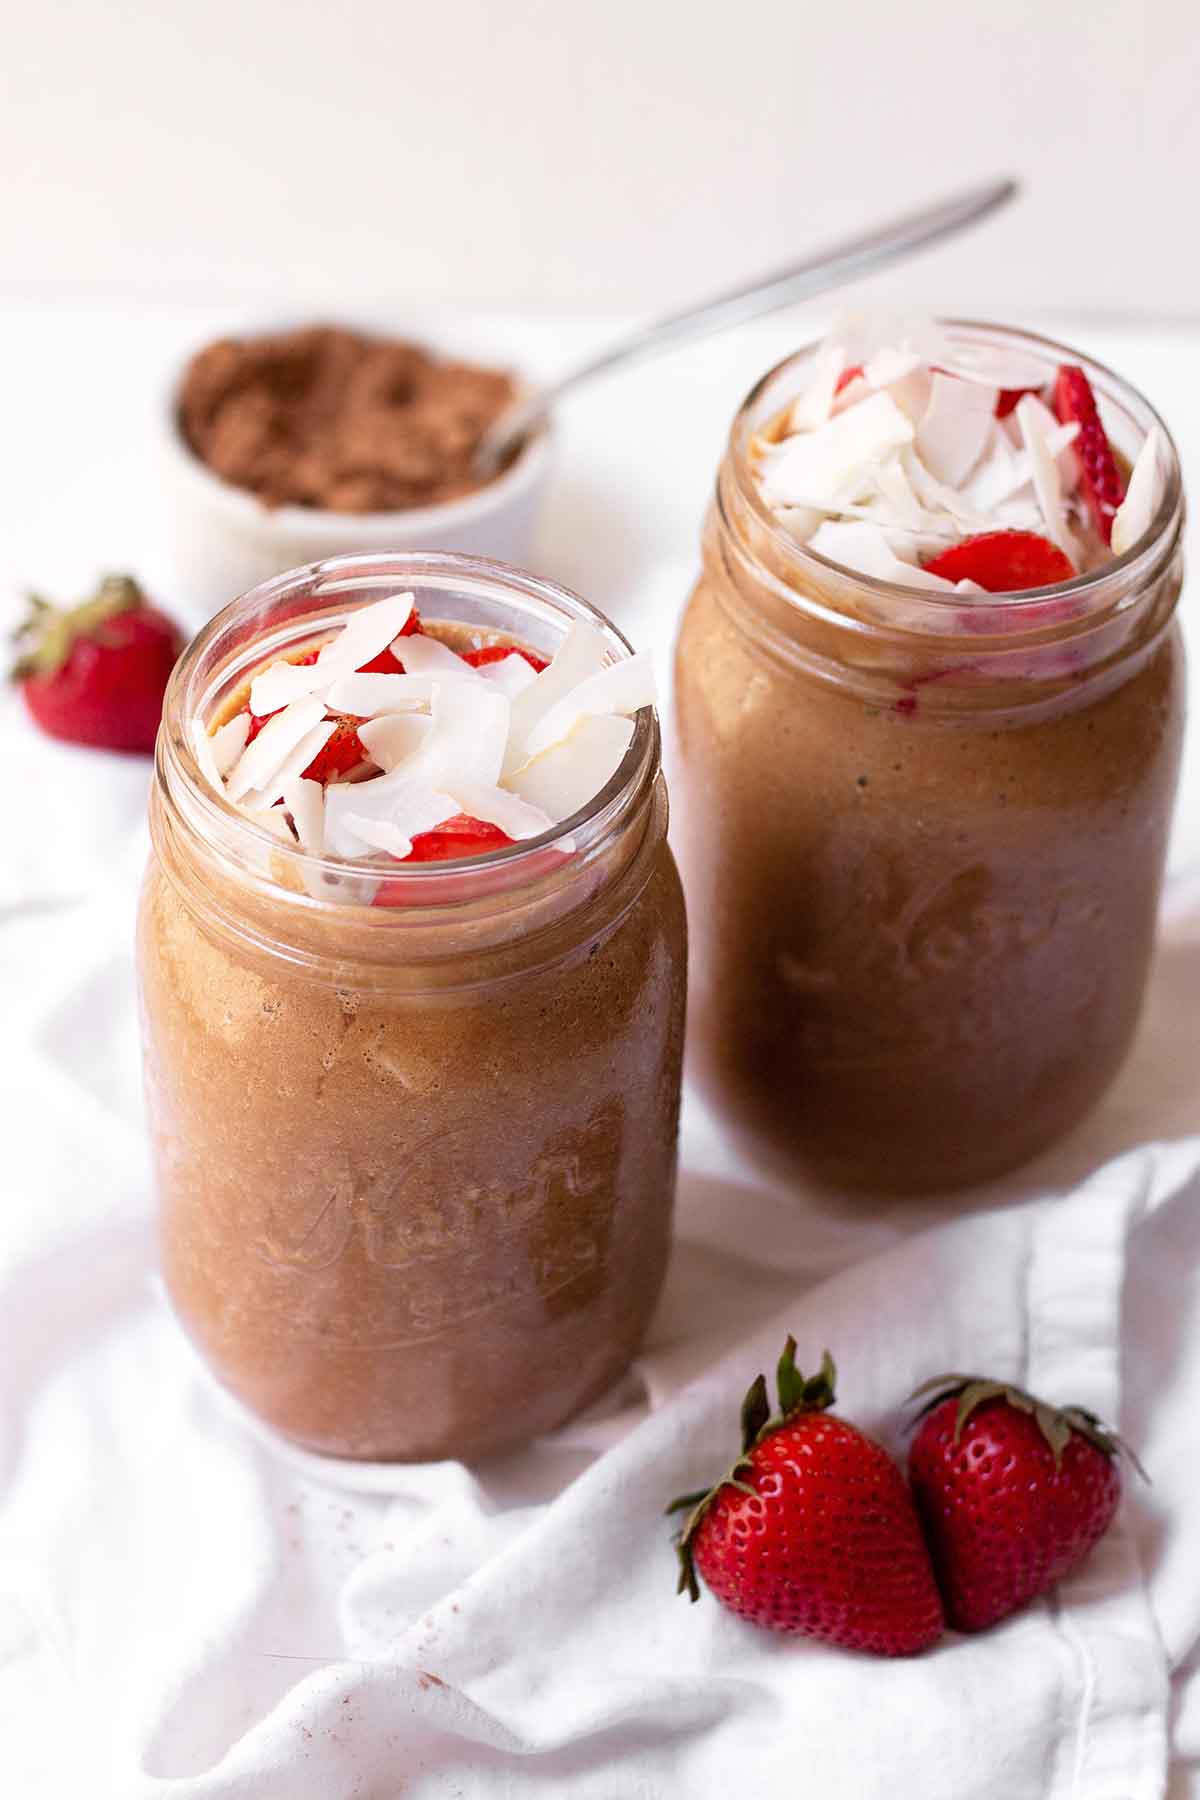 Two glasses of chocolate banana smoothie topped with coconut and strawberries